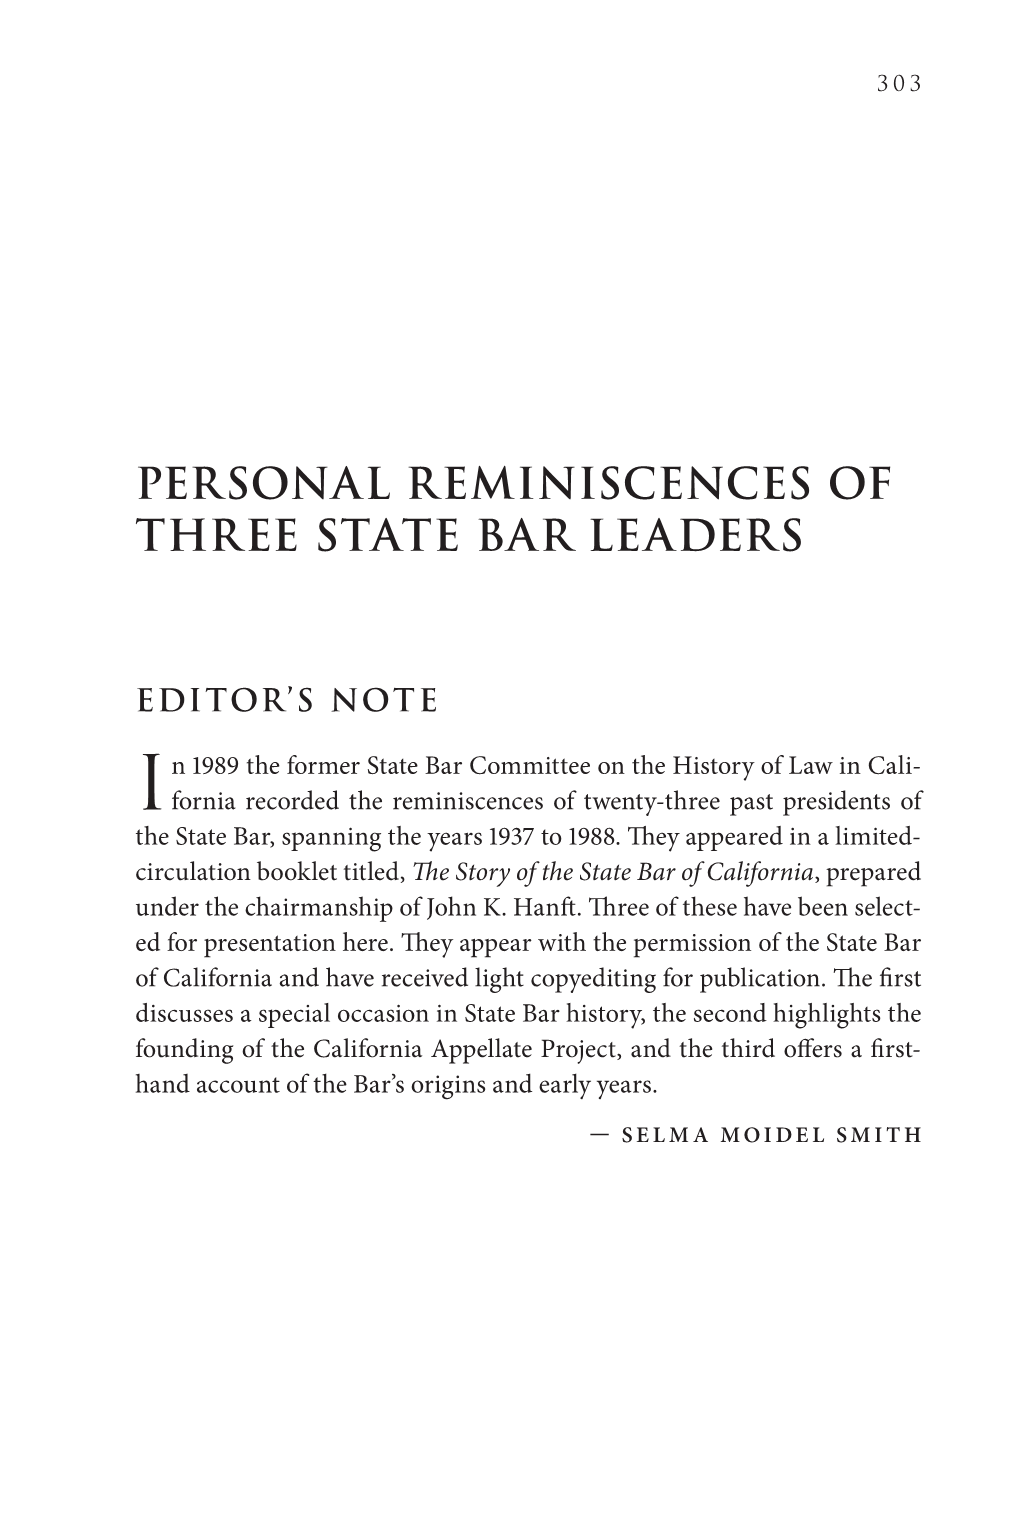 Personal Reminiscences of Three State Bar Leaders